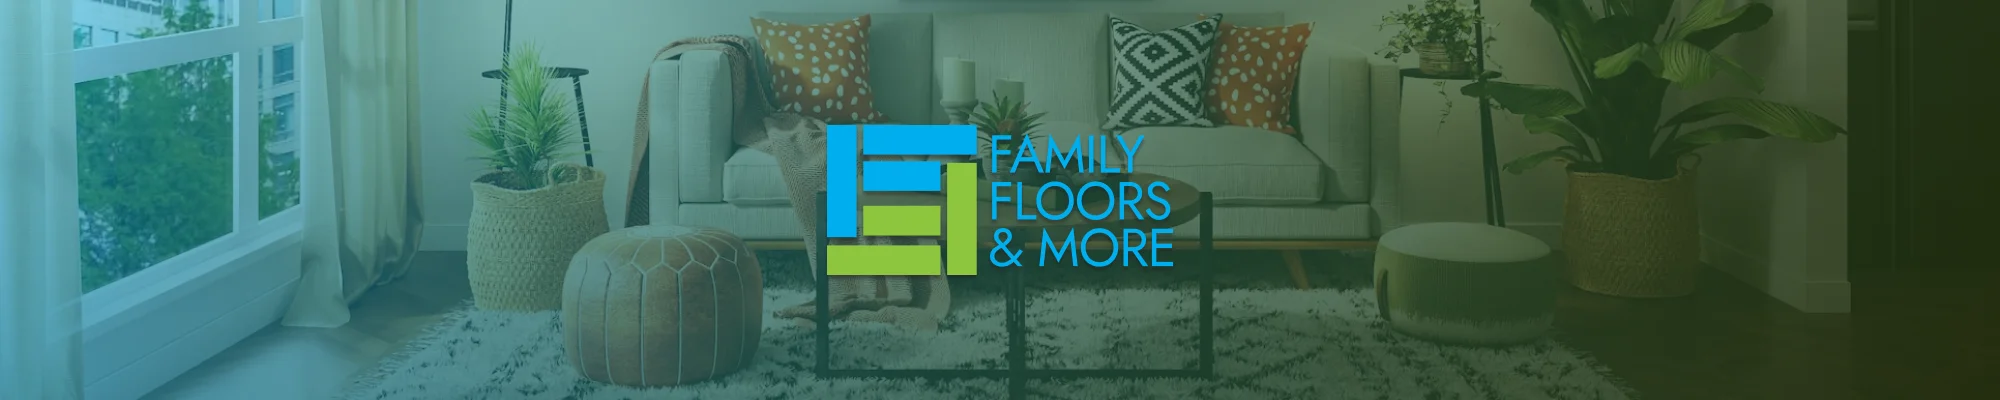 Family Floors & More is your best choice for flooring in the Elk Grove, CA area